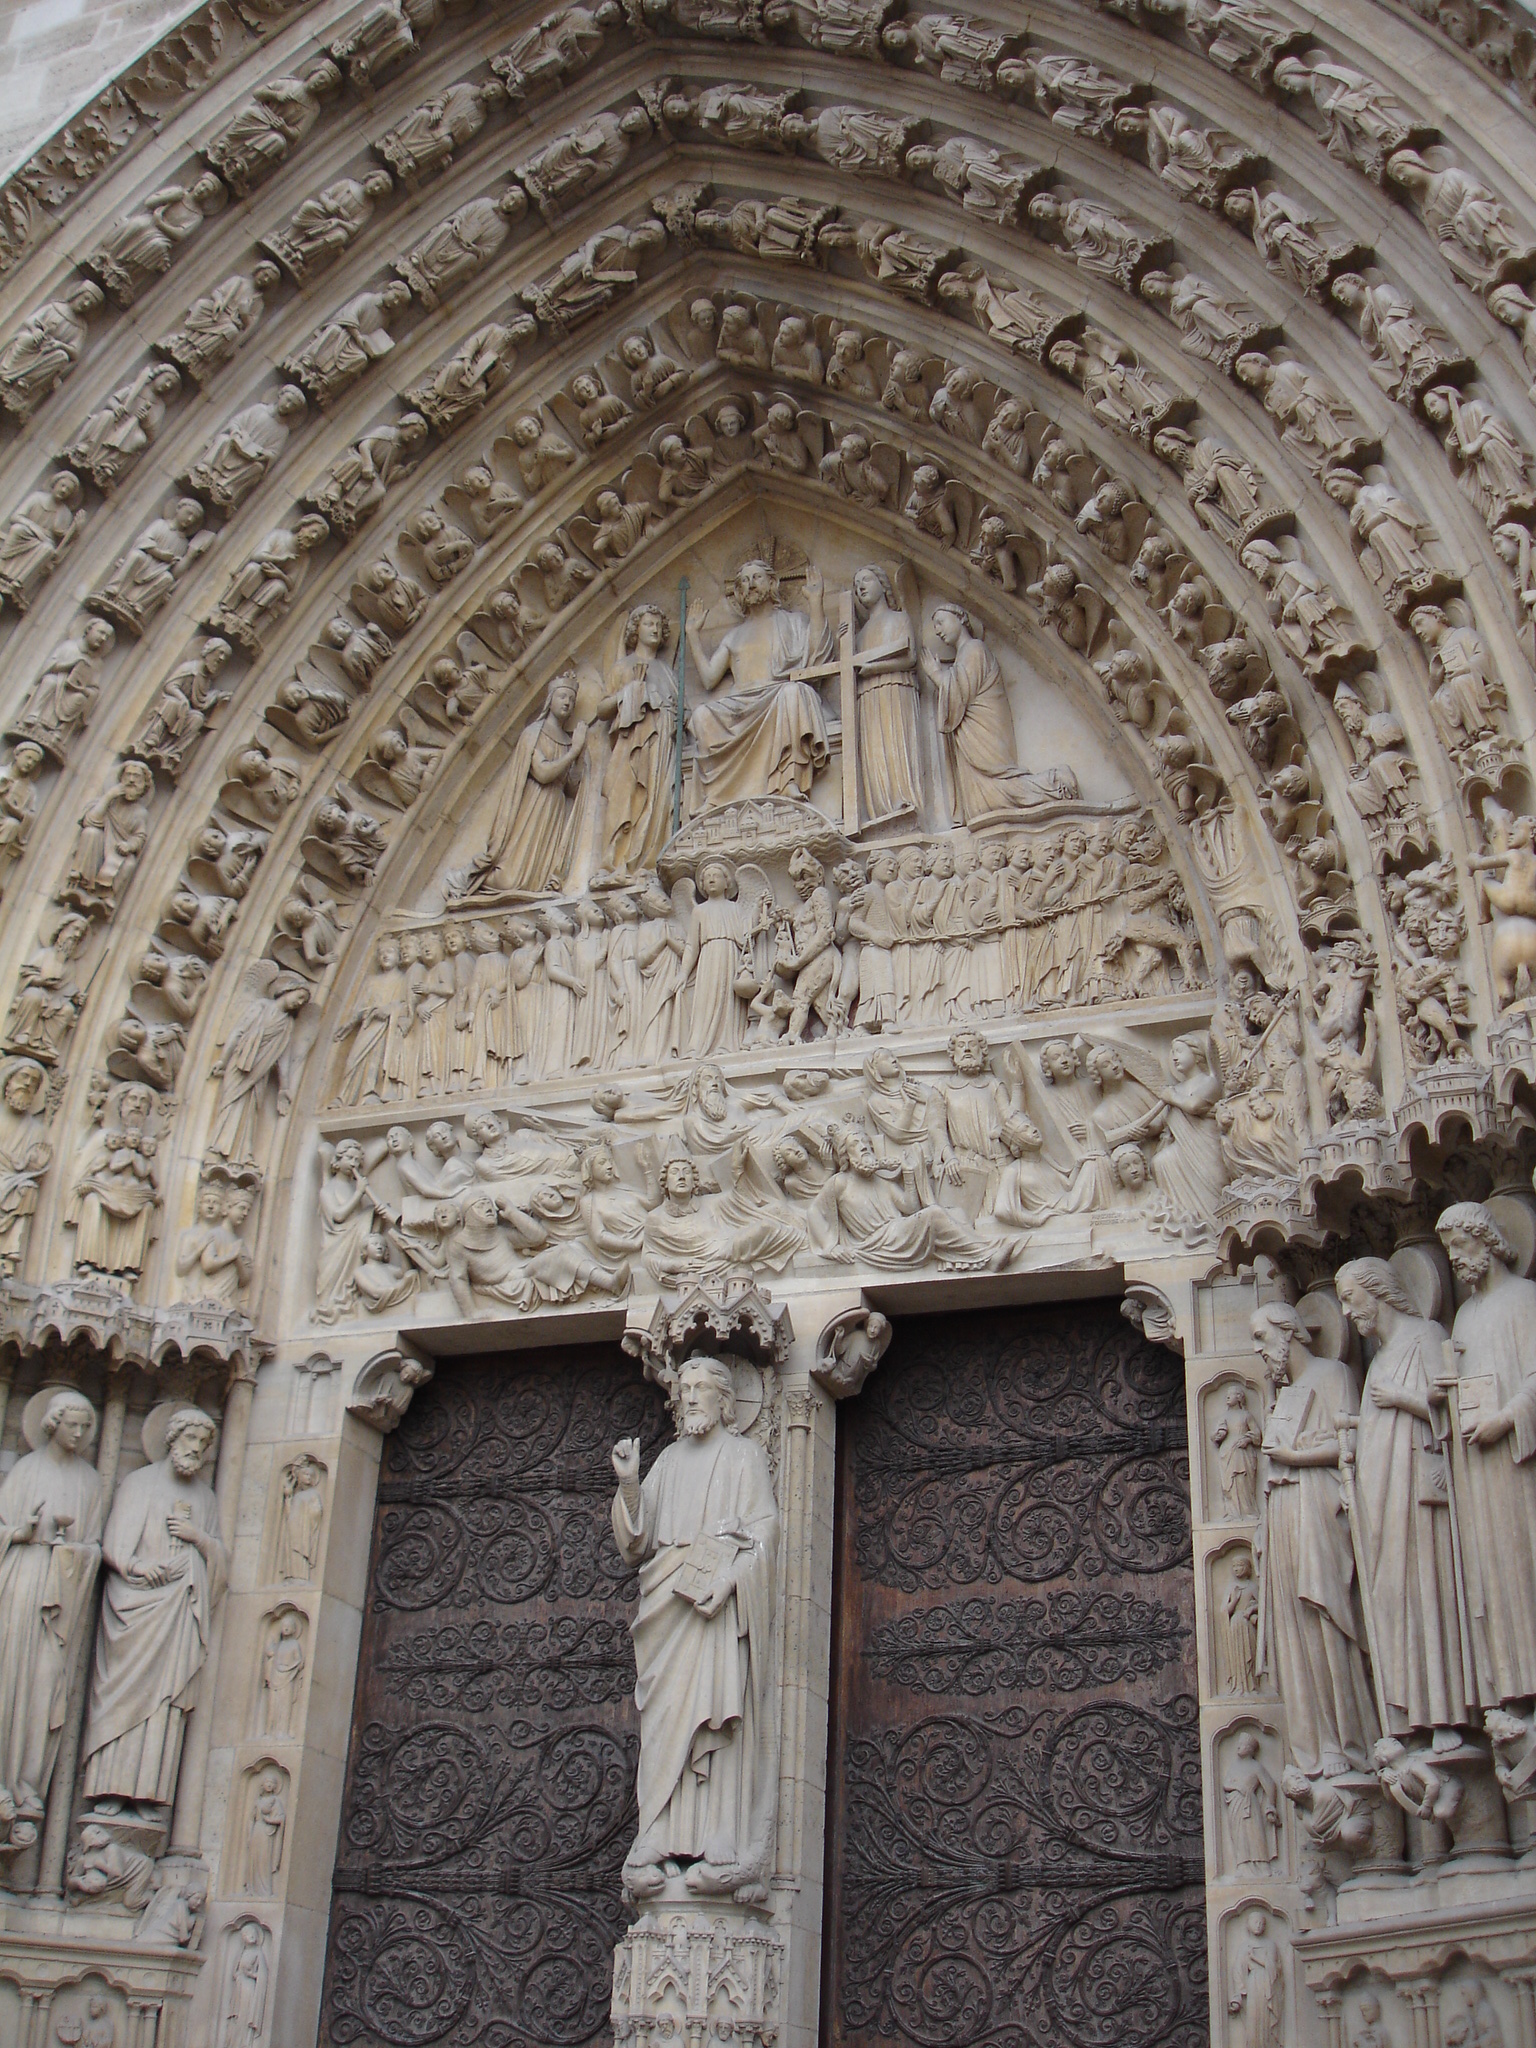 an intricate sculpture of people on a building facade